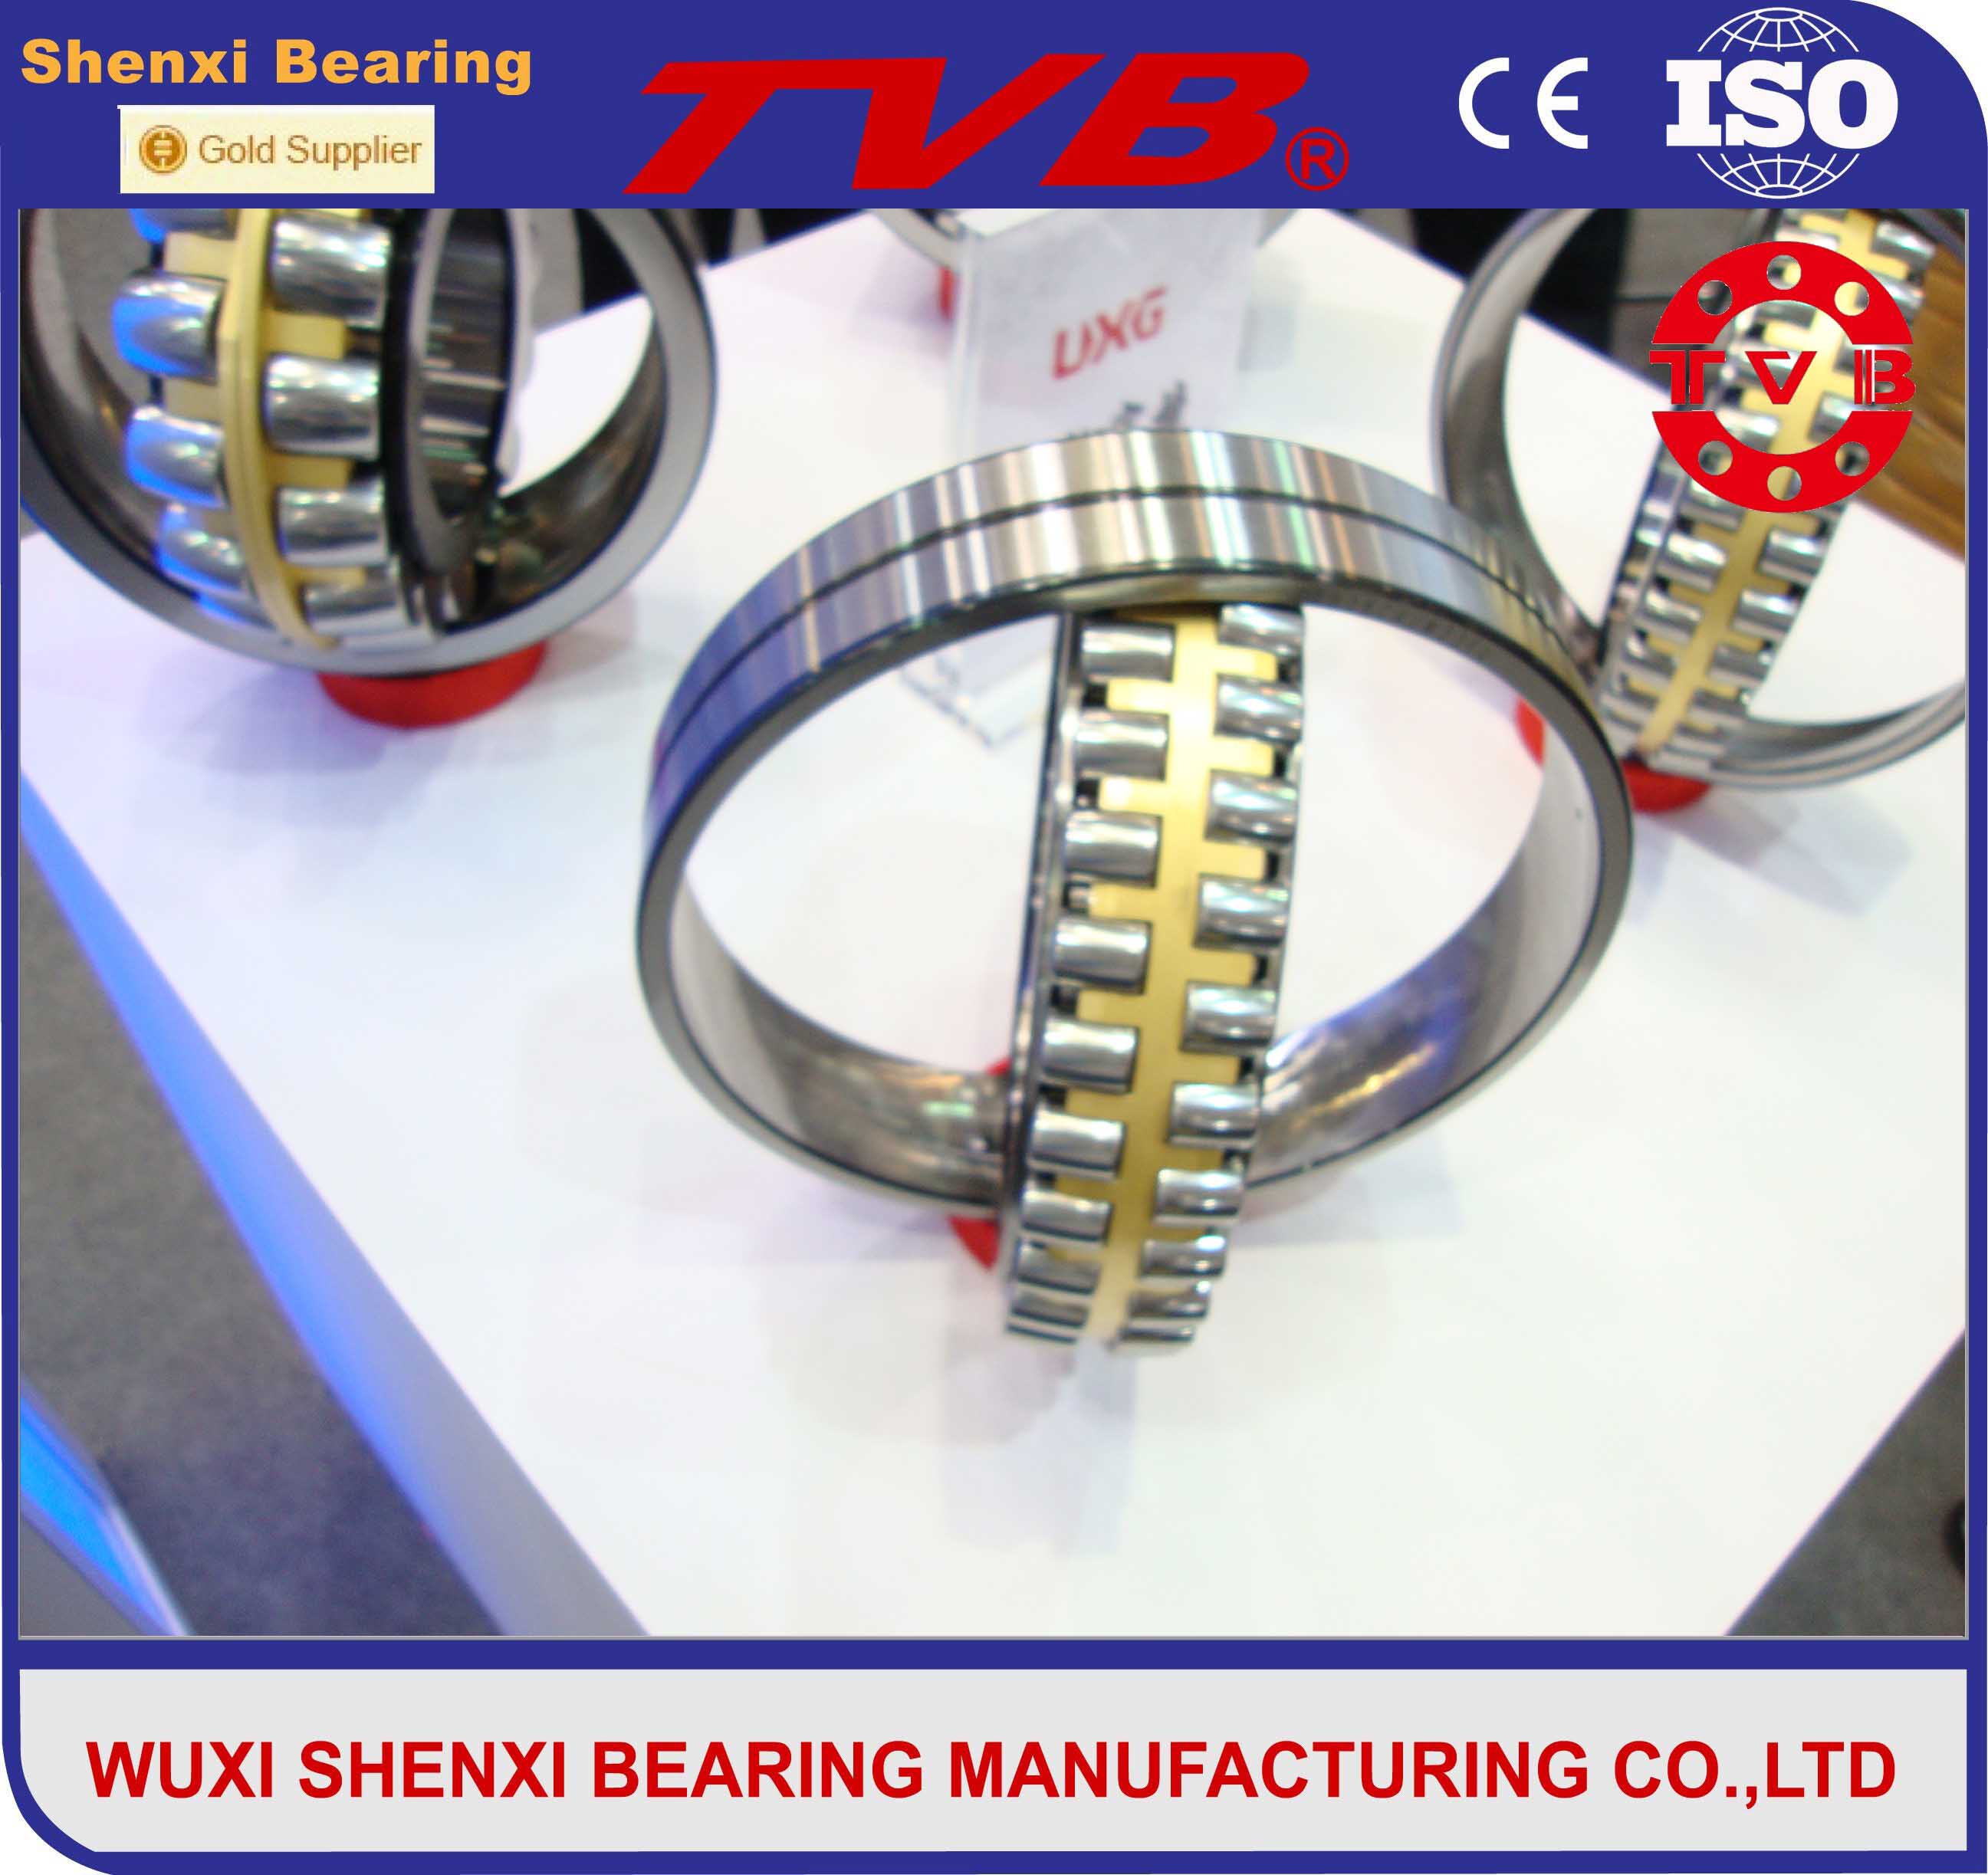 Chinese OEM bearing spherical roller bearings hot new products for 2015